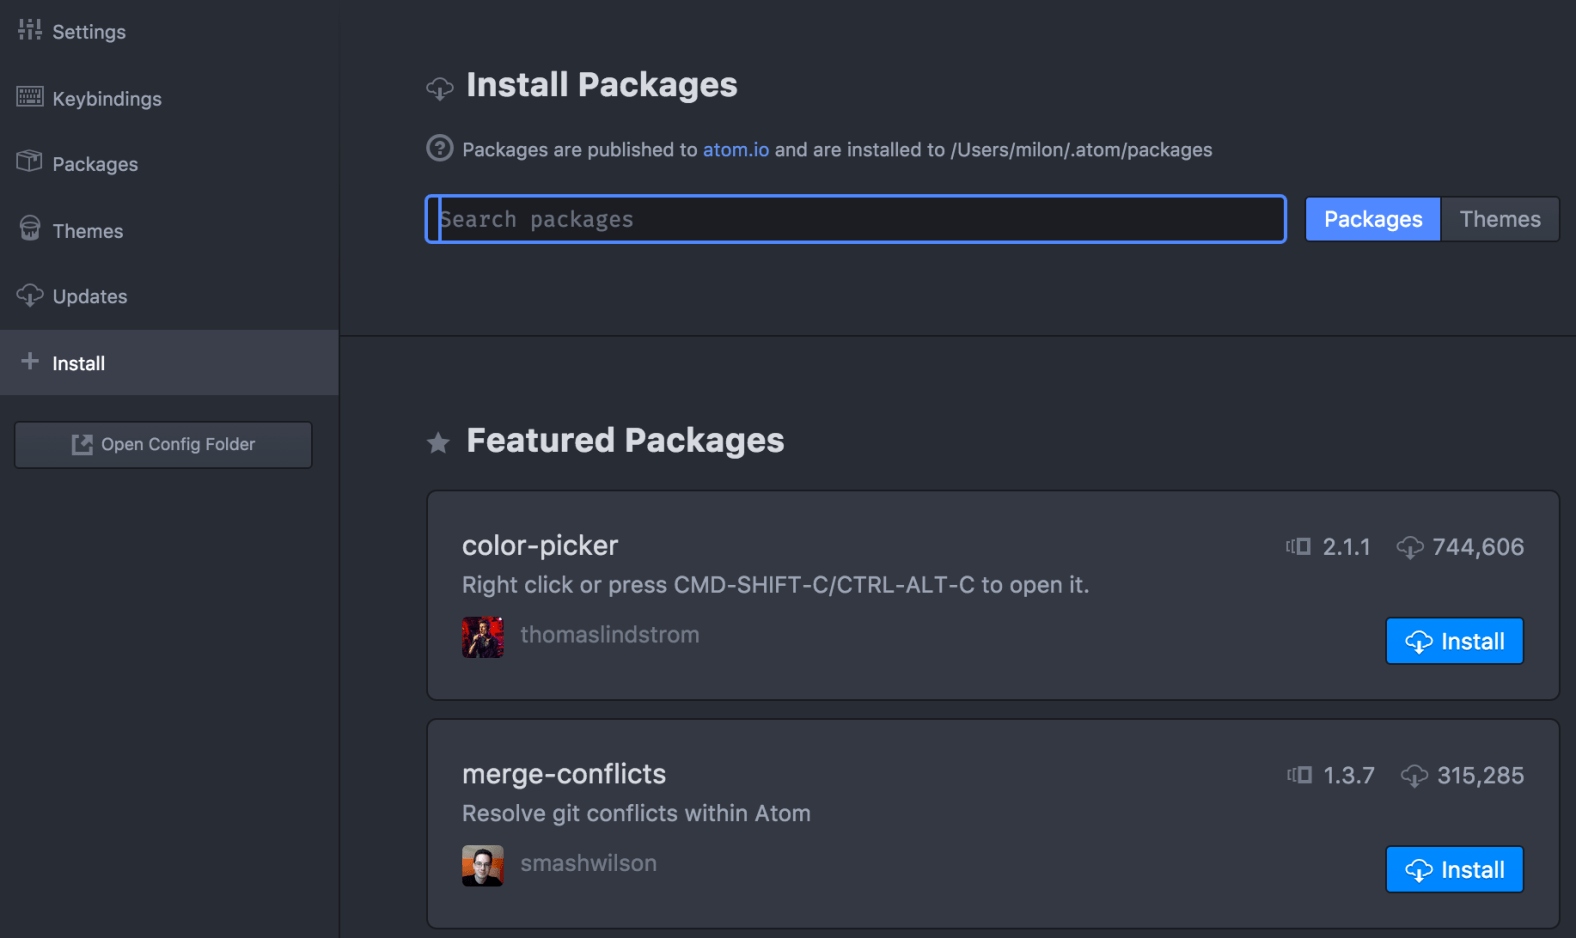 Install Packages